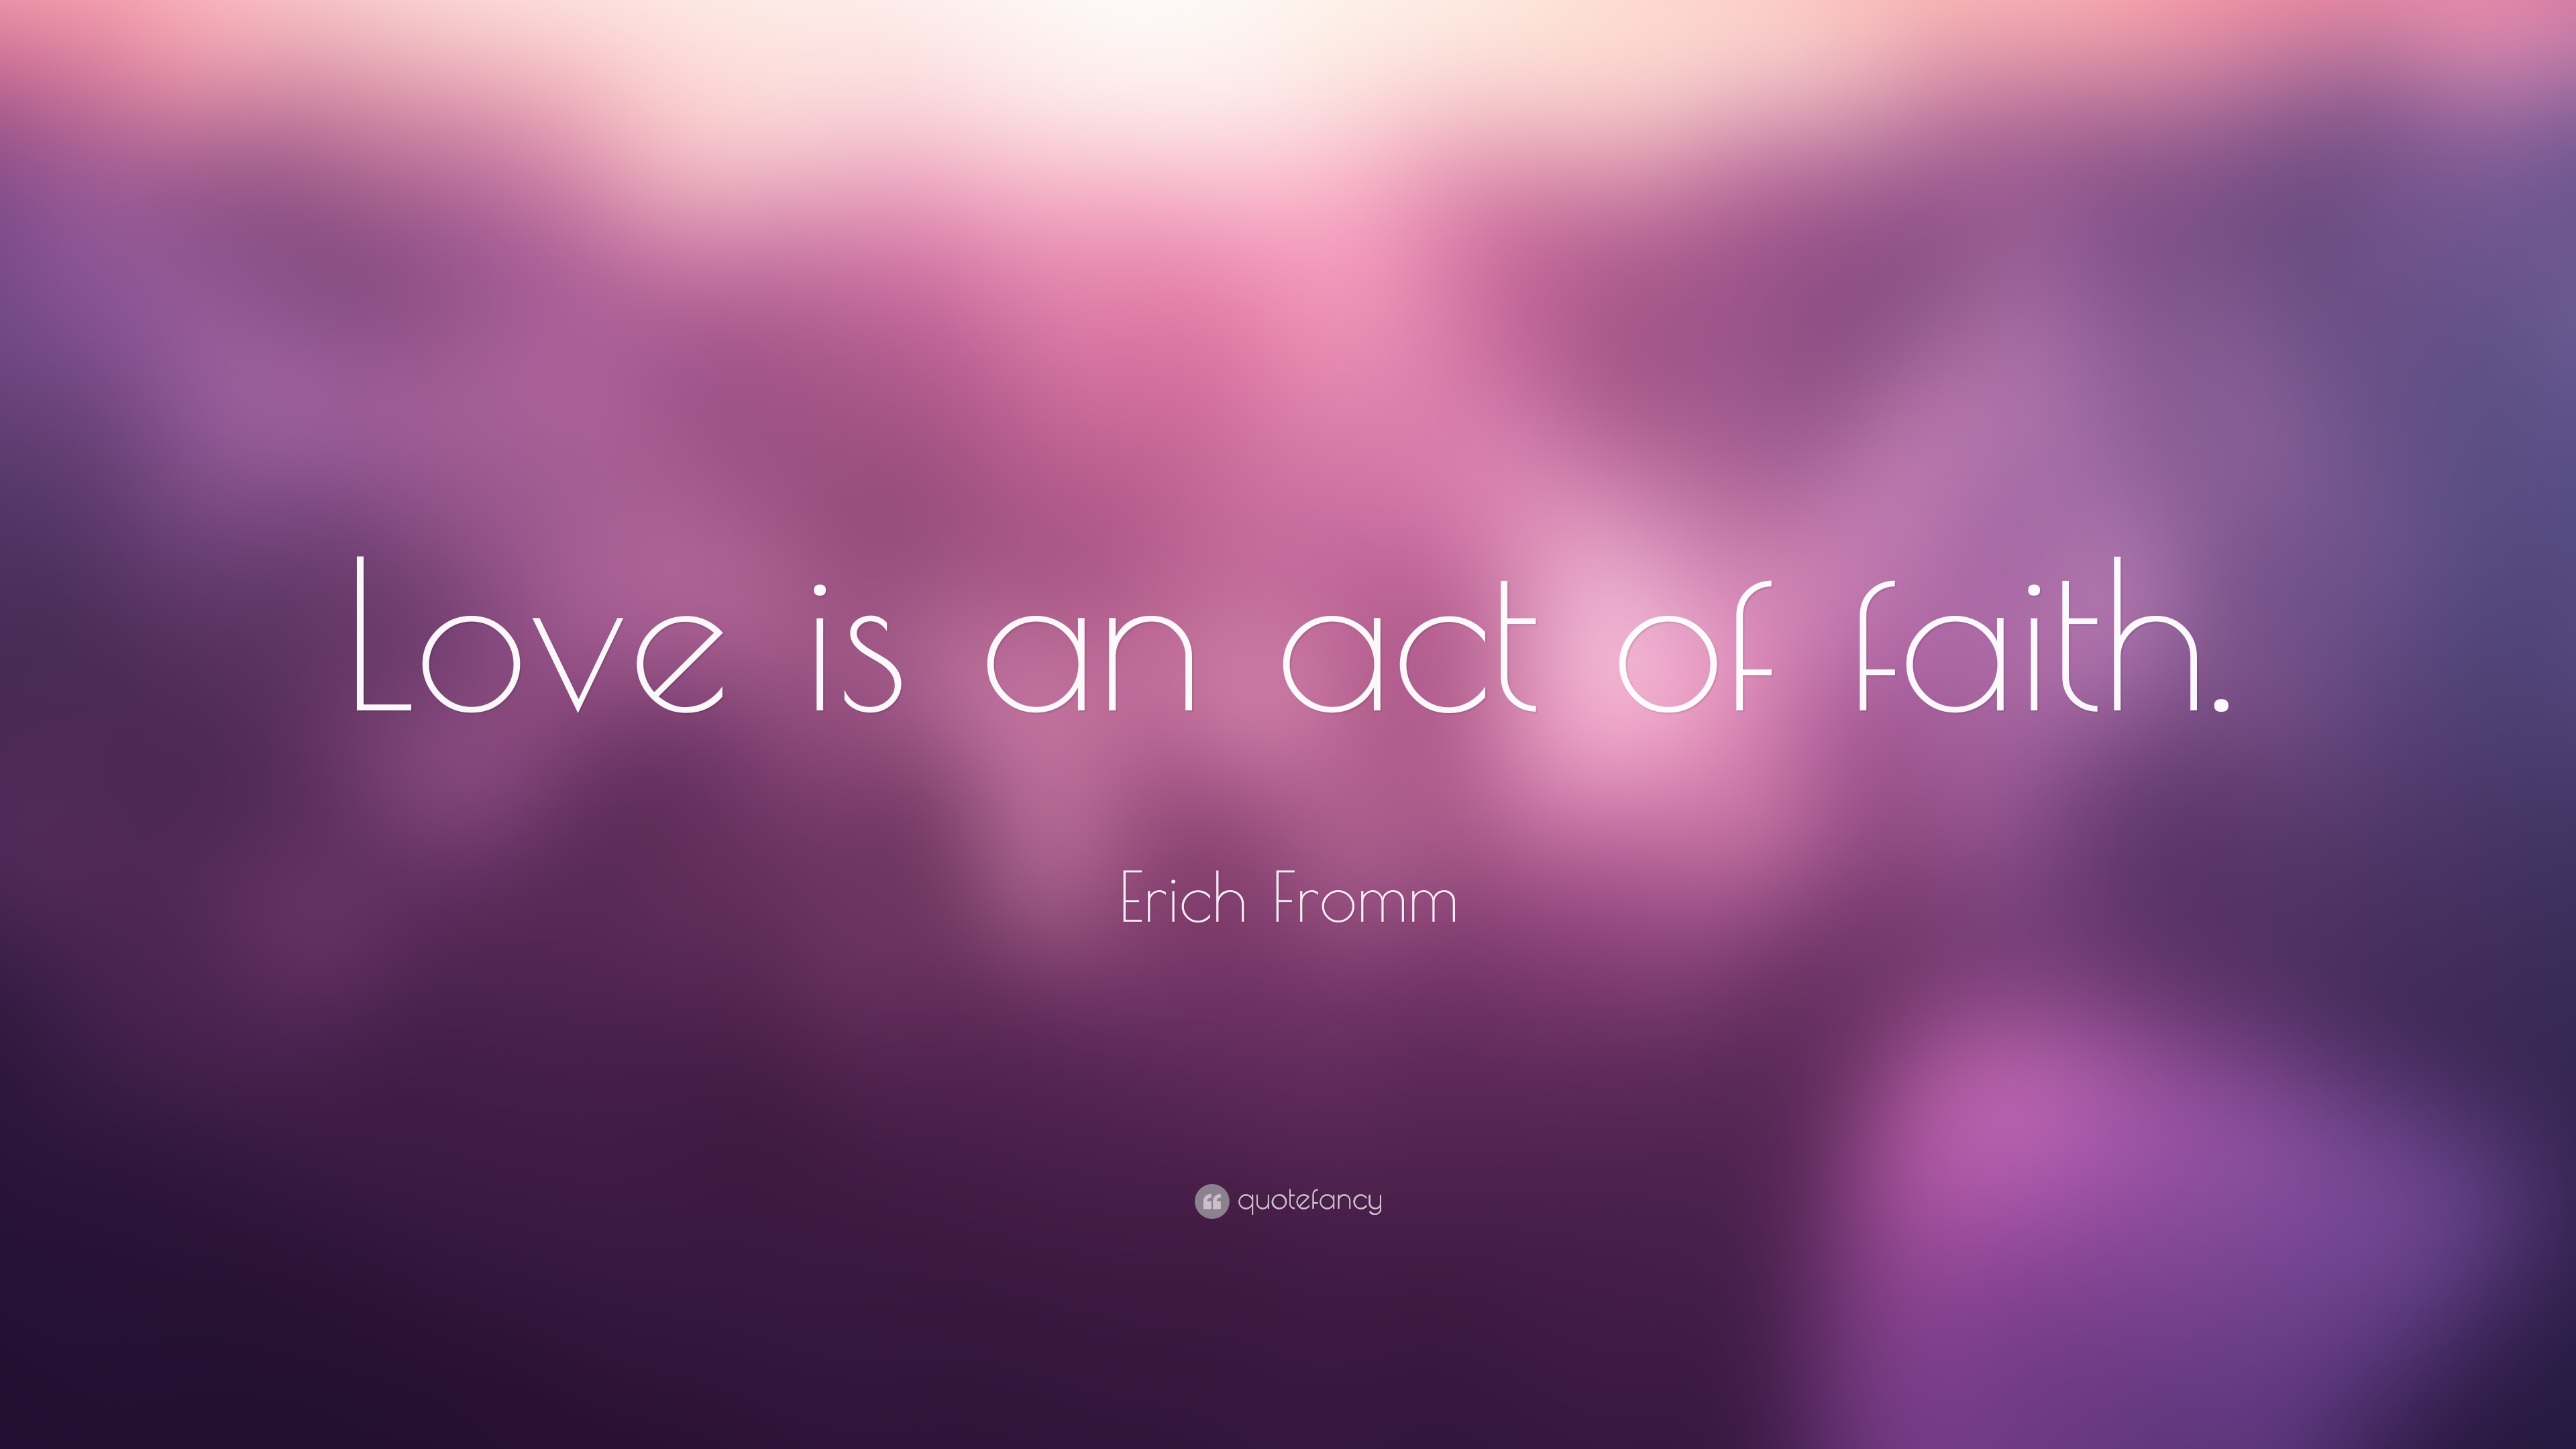 Love Is An Act Of Faith Wallpaper HD Inspiring Quotes